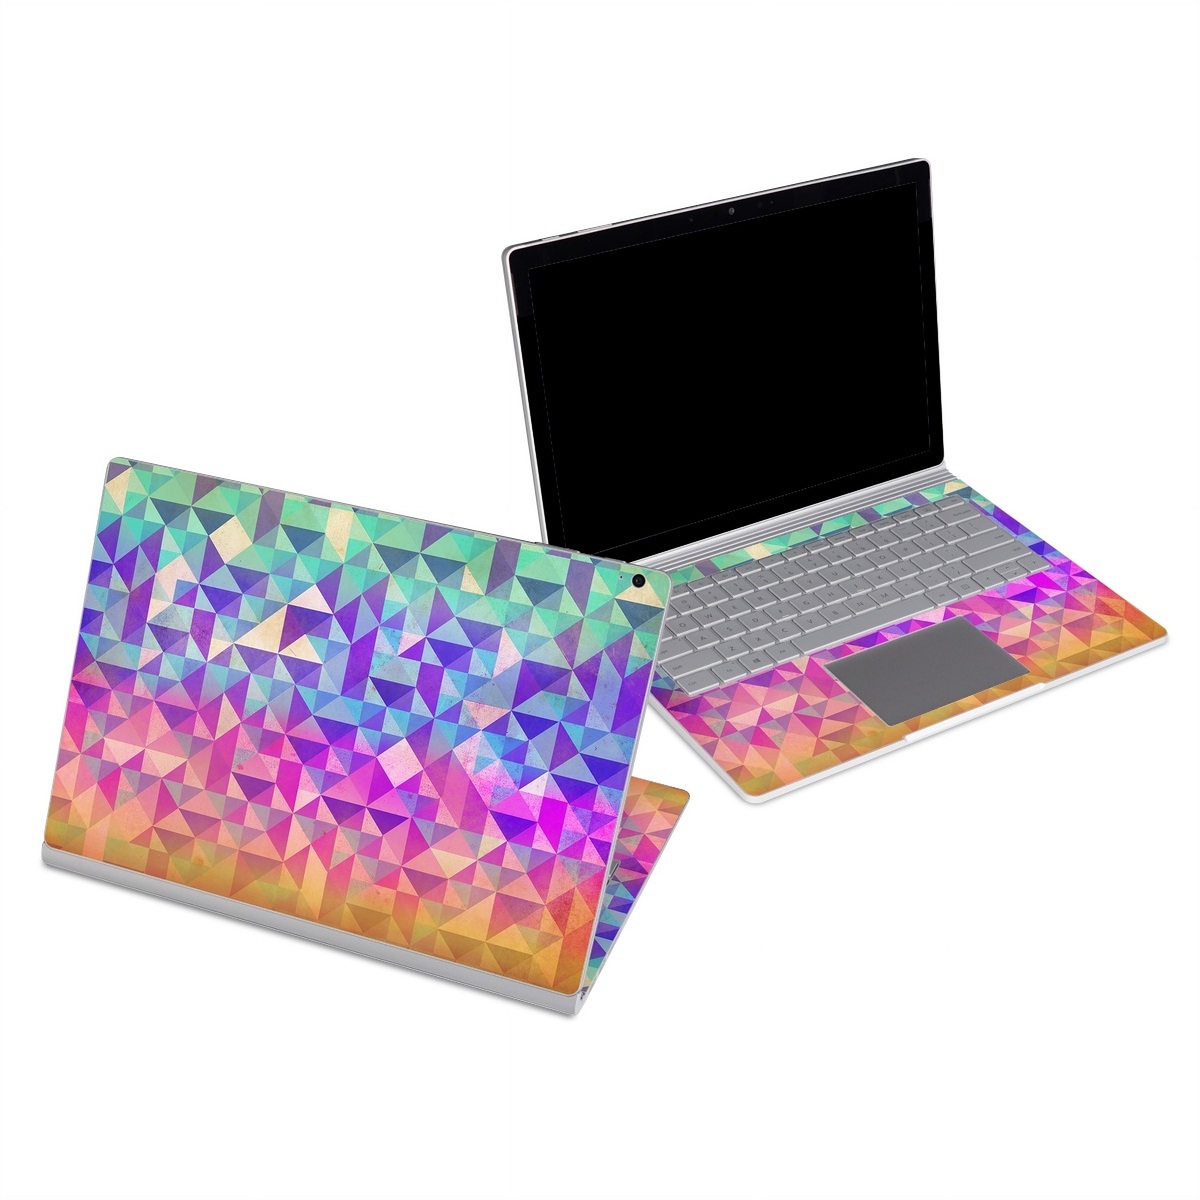 Microsoft Surface Book Series Skin design of Pattern, Purple, Triangle, Violet, Magenta, Line, Design, Symmetry, Psychedelic art, with gray, purple, green, blue, pink colors